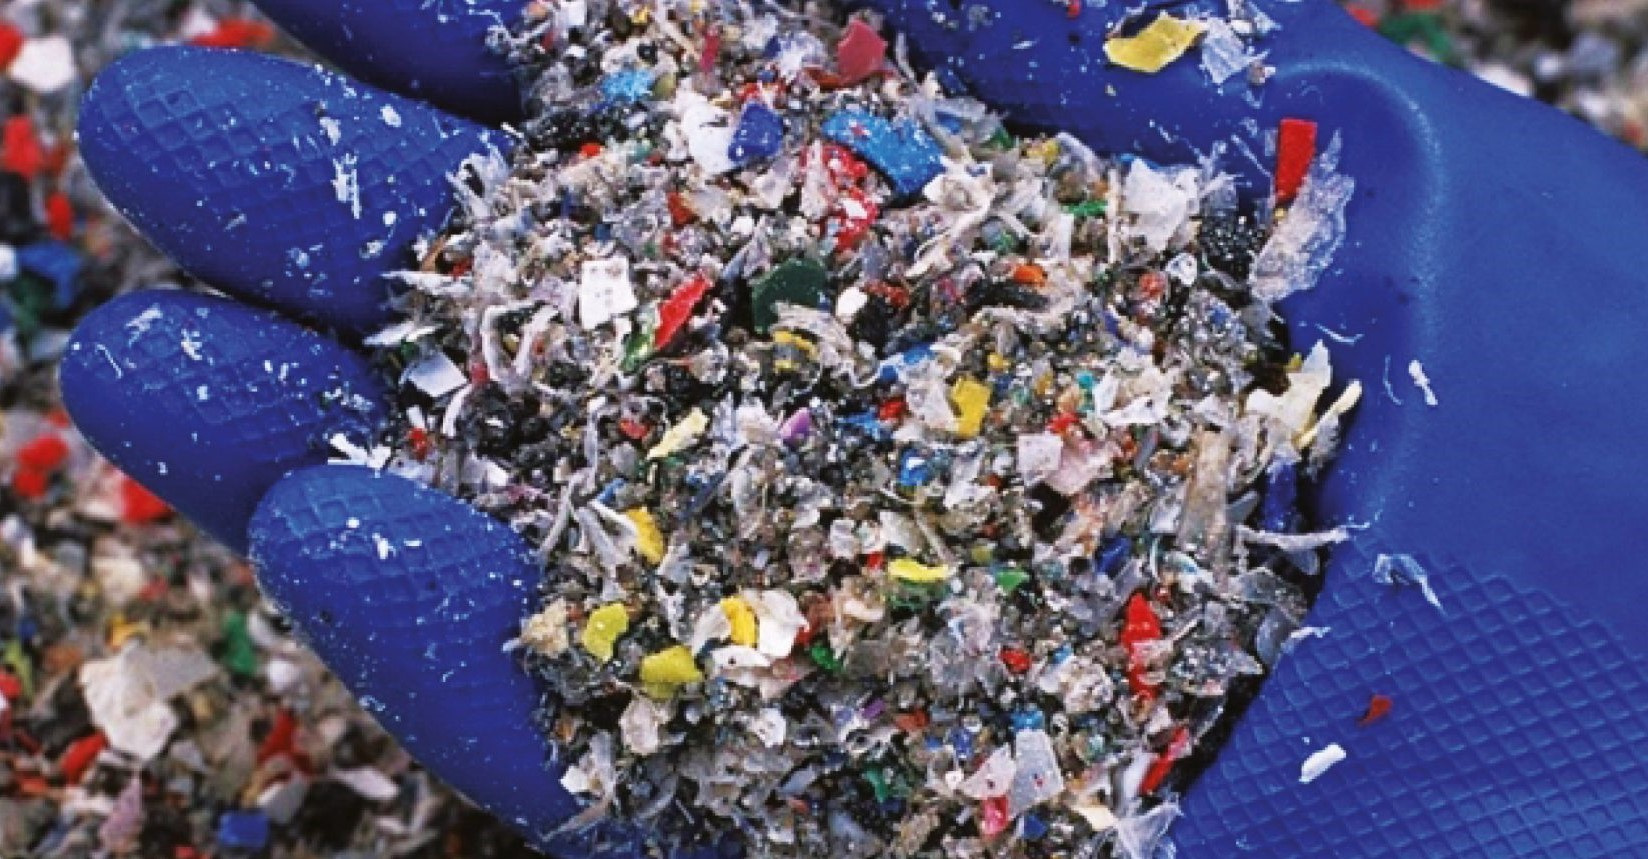 Shredded plastic prepared for recycling at Mura technologies